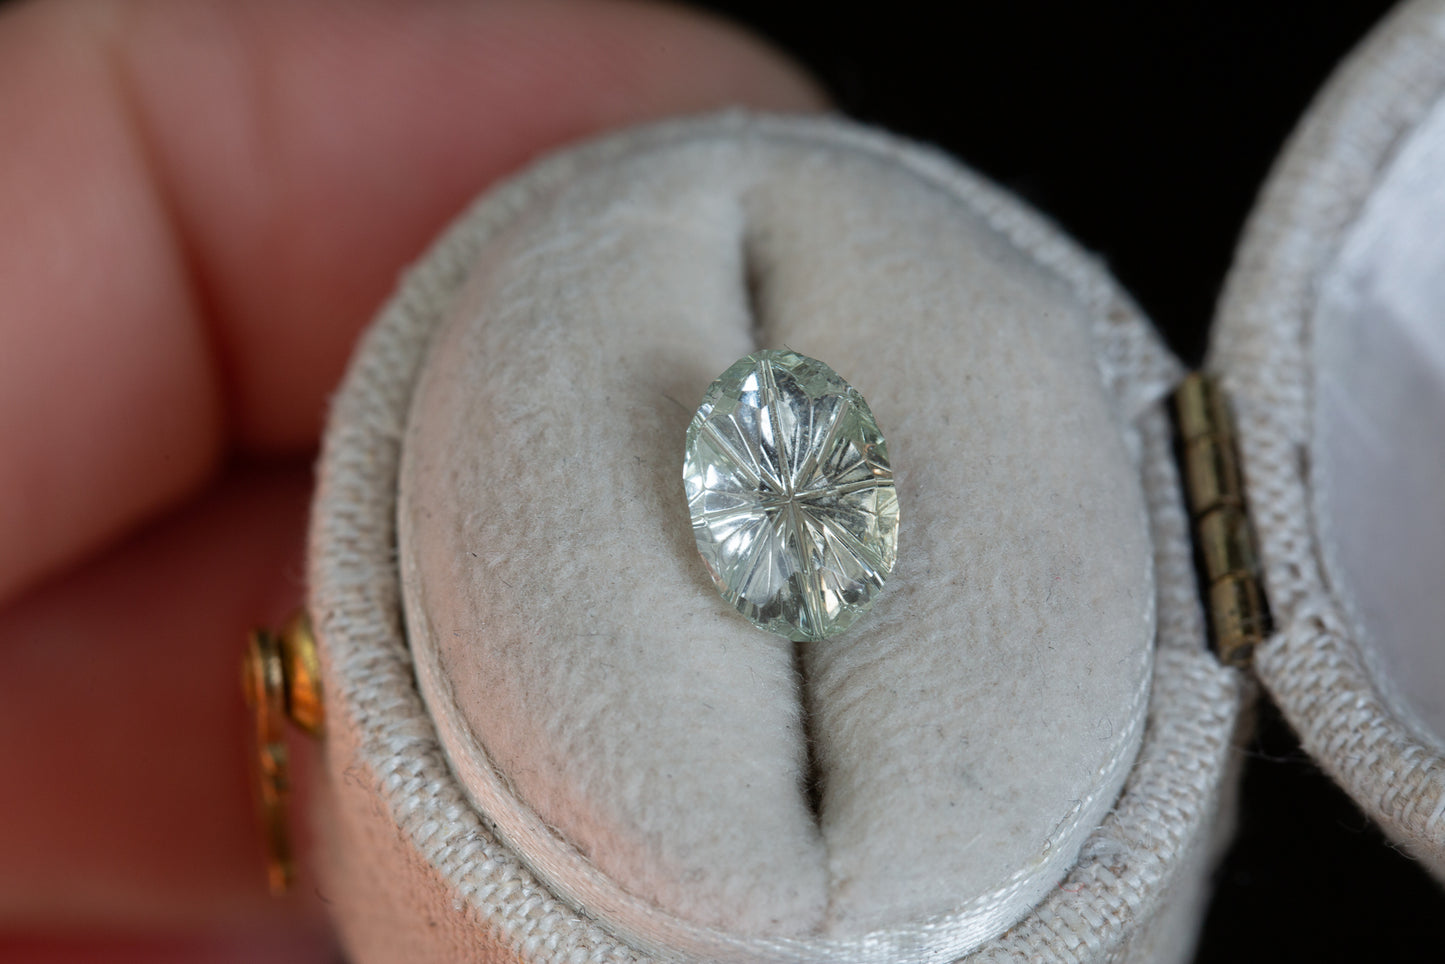 1.89ct oval white sapphire - Starbrite cut by John Dyer